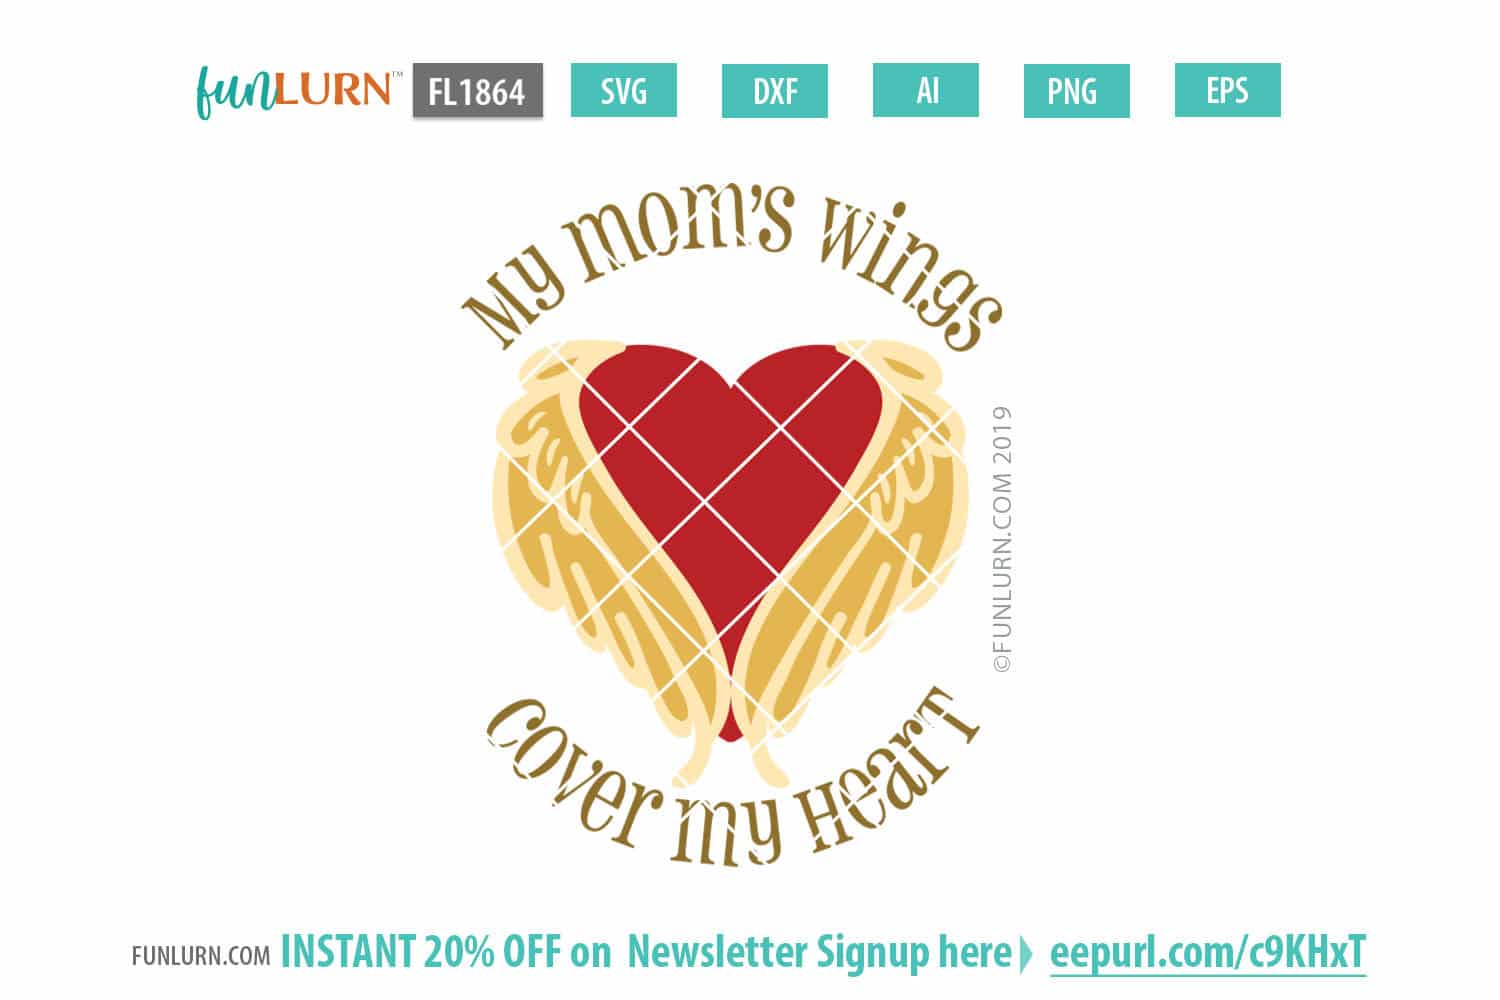 Download My mom's wings cover my heart - FunLurn